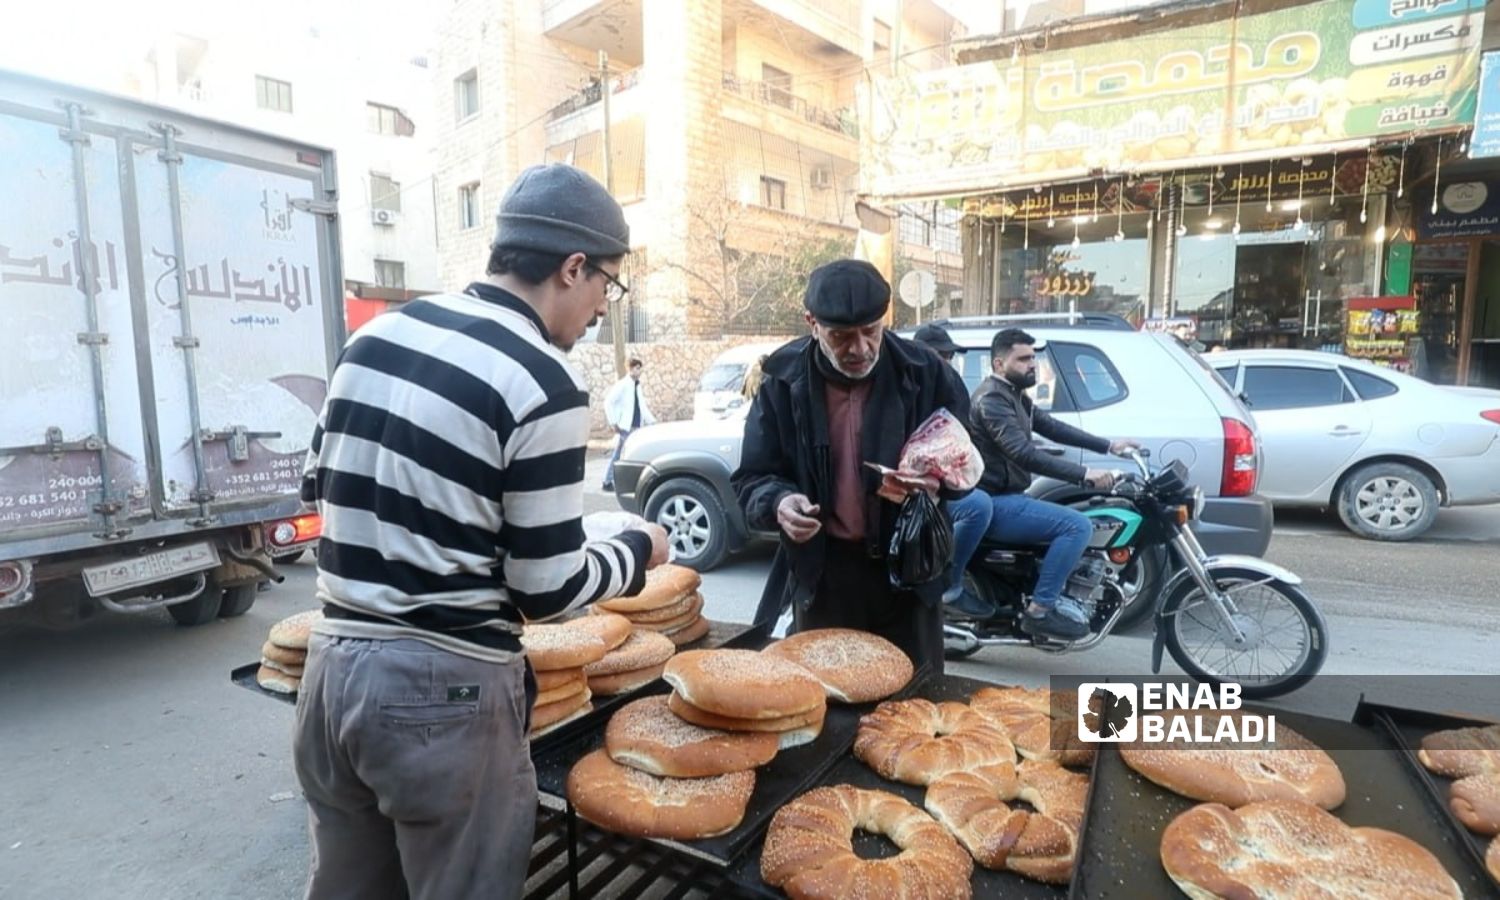 Day laborers strive to earn extra income during the month of Ramadan through stalls selling food and drinks - March 26, 2024 (Enab Baladi/Anas al-Khouli)